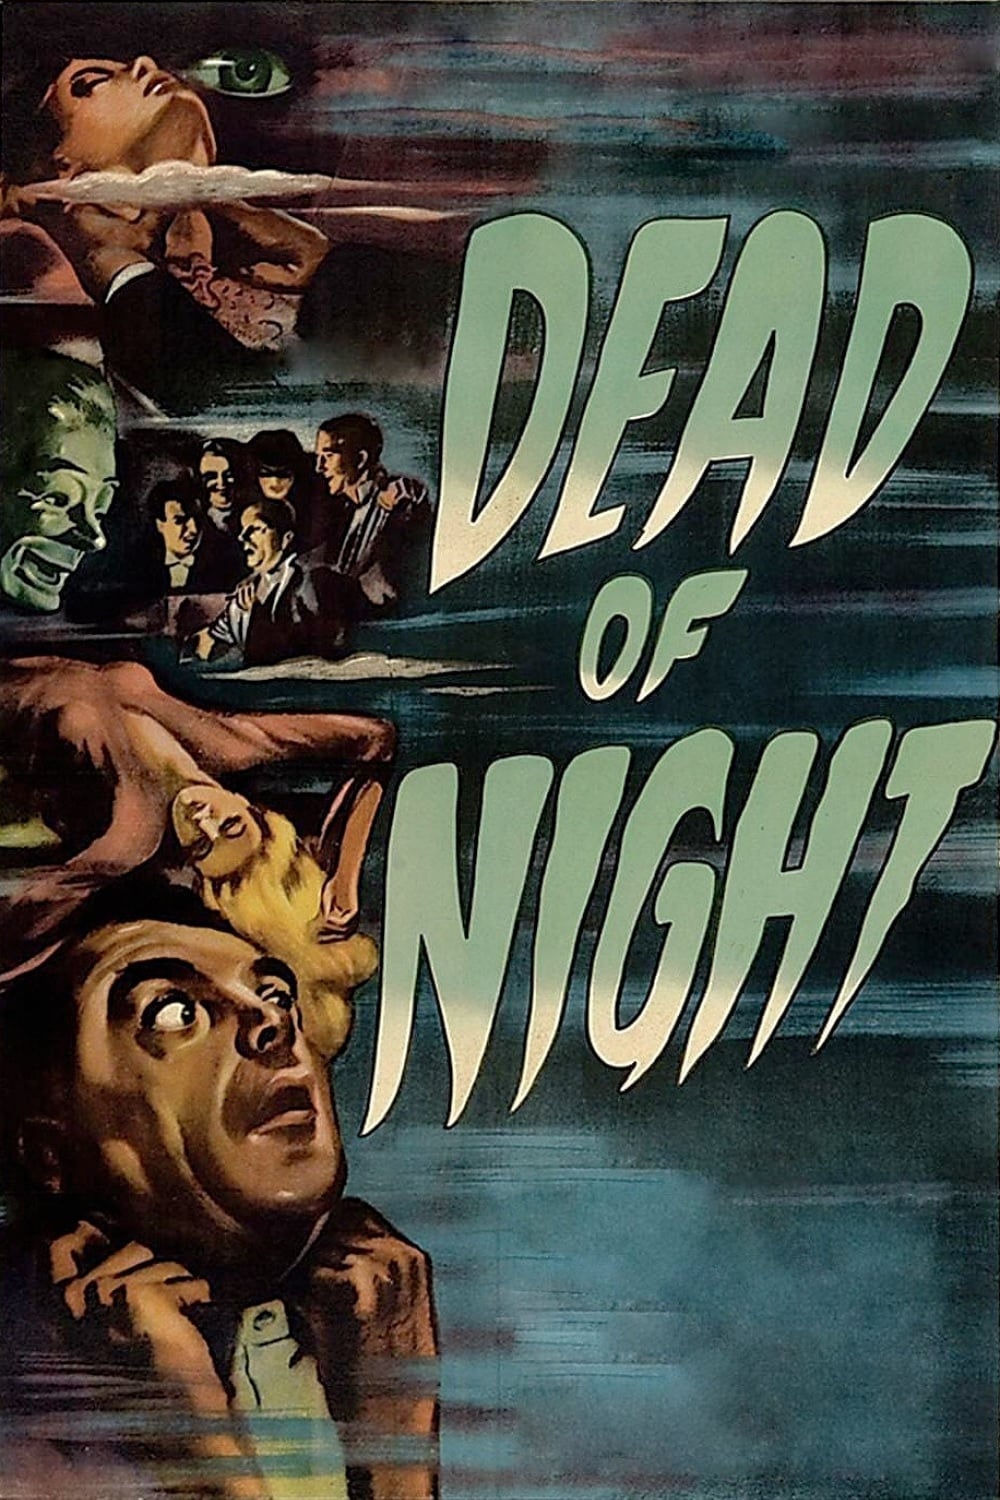 Dead of Night Movie Poster High Quality Glossy Paper A1 A2 A3 A4 A3 Framed or Unframed!!!